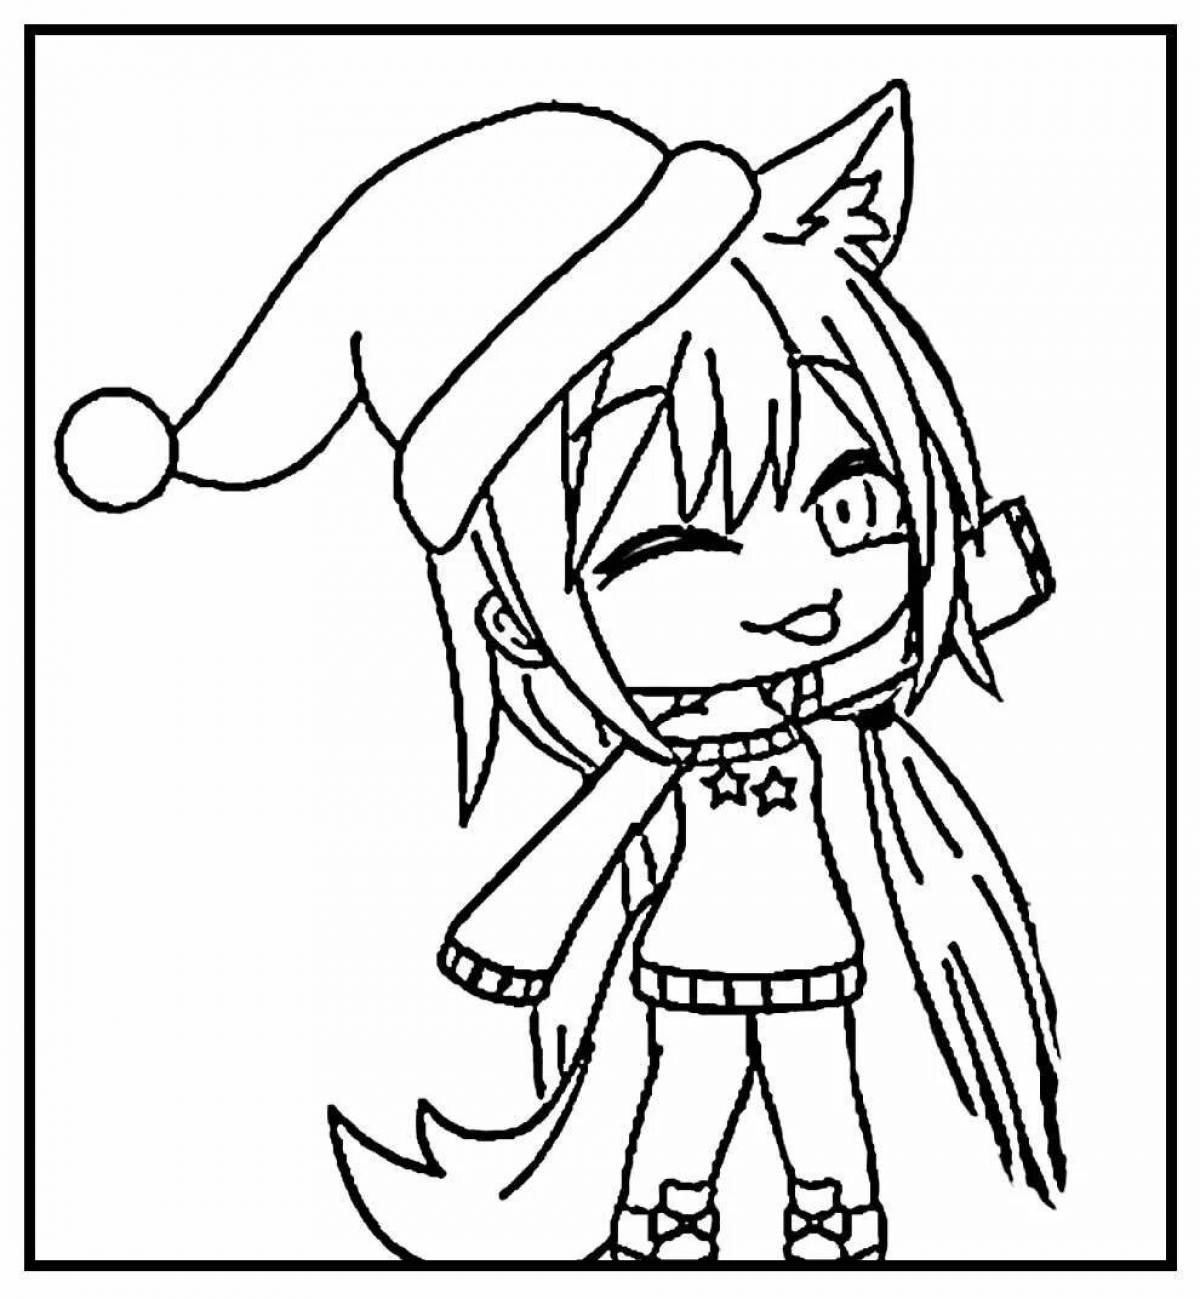 Gacha life mysterious hair coloring page